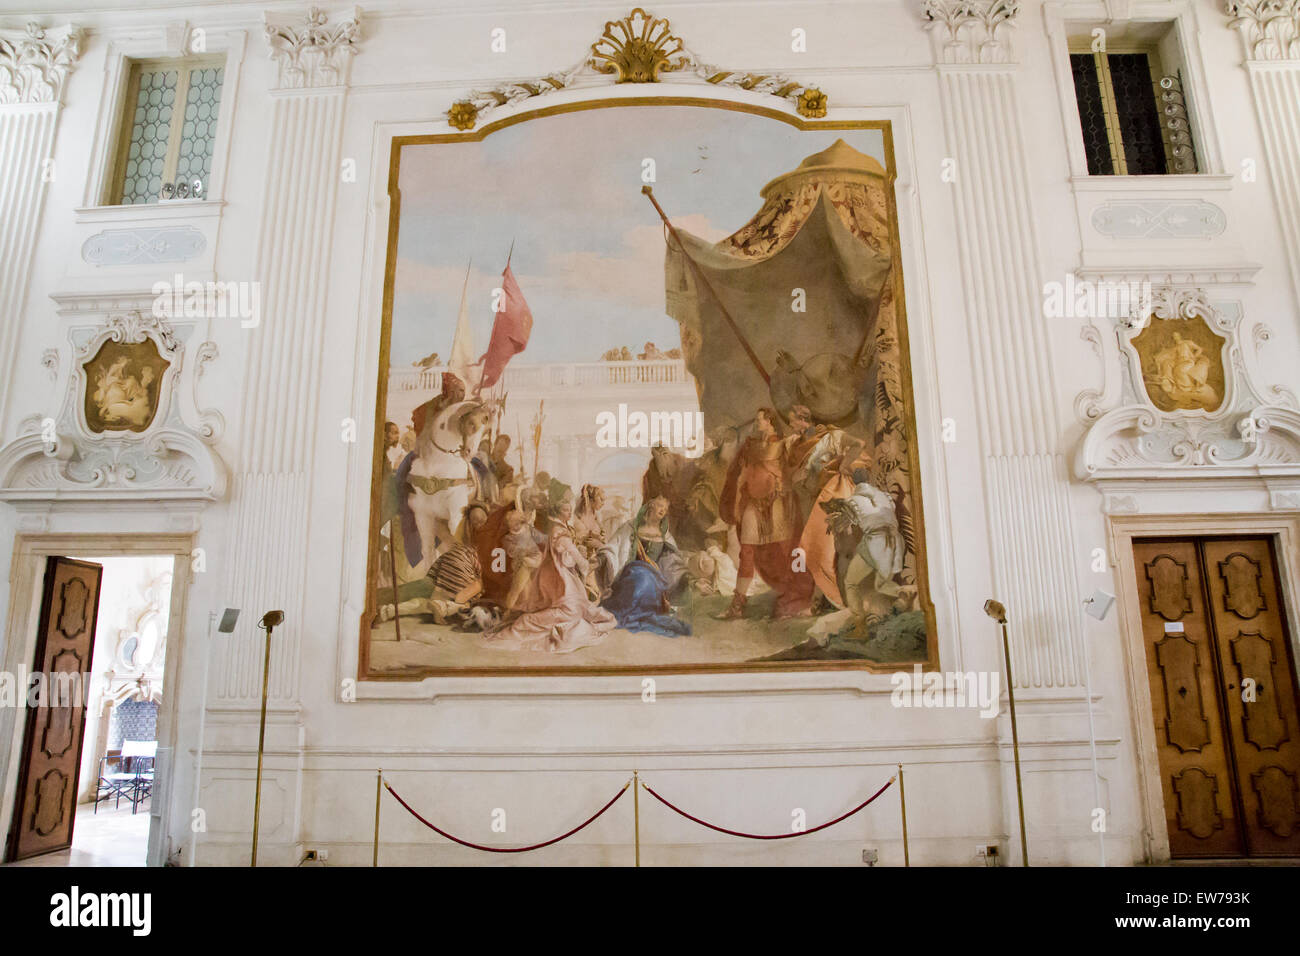 VICENZA, ITALY - MAY 13: Hall of Honour with the fresco 'Alexander the Great with Darius' family' by Giambattista Tiepolo, insid Stock Photo